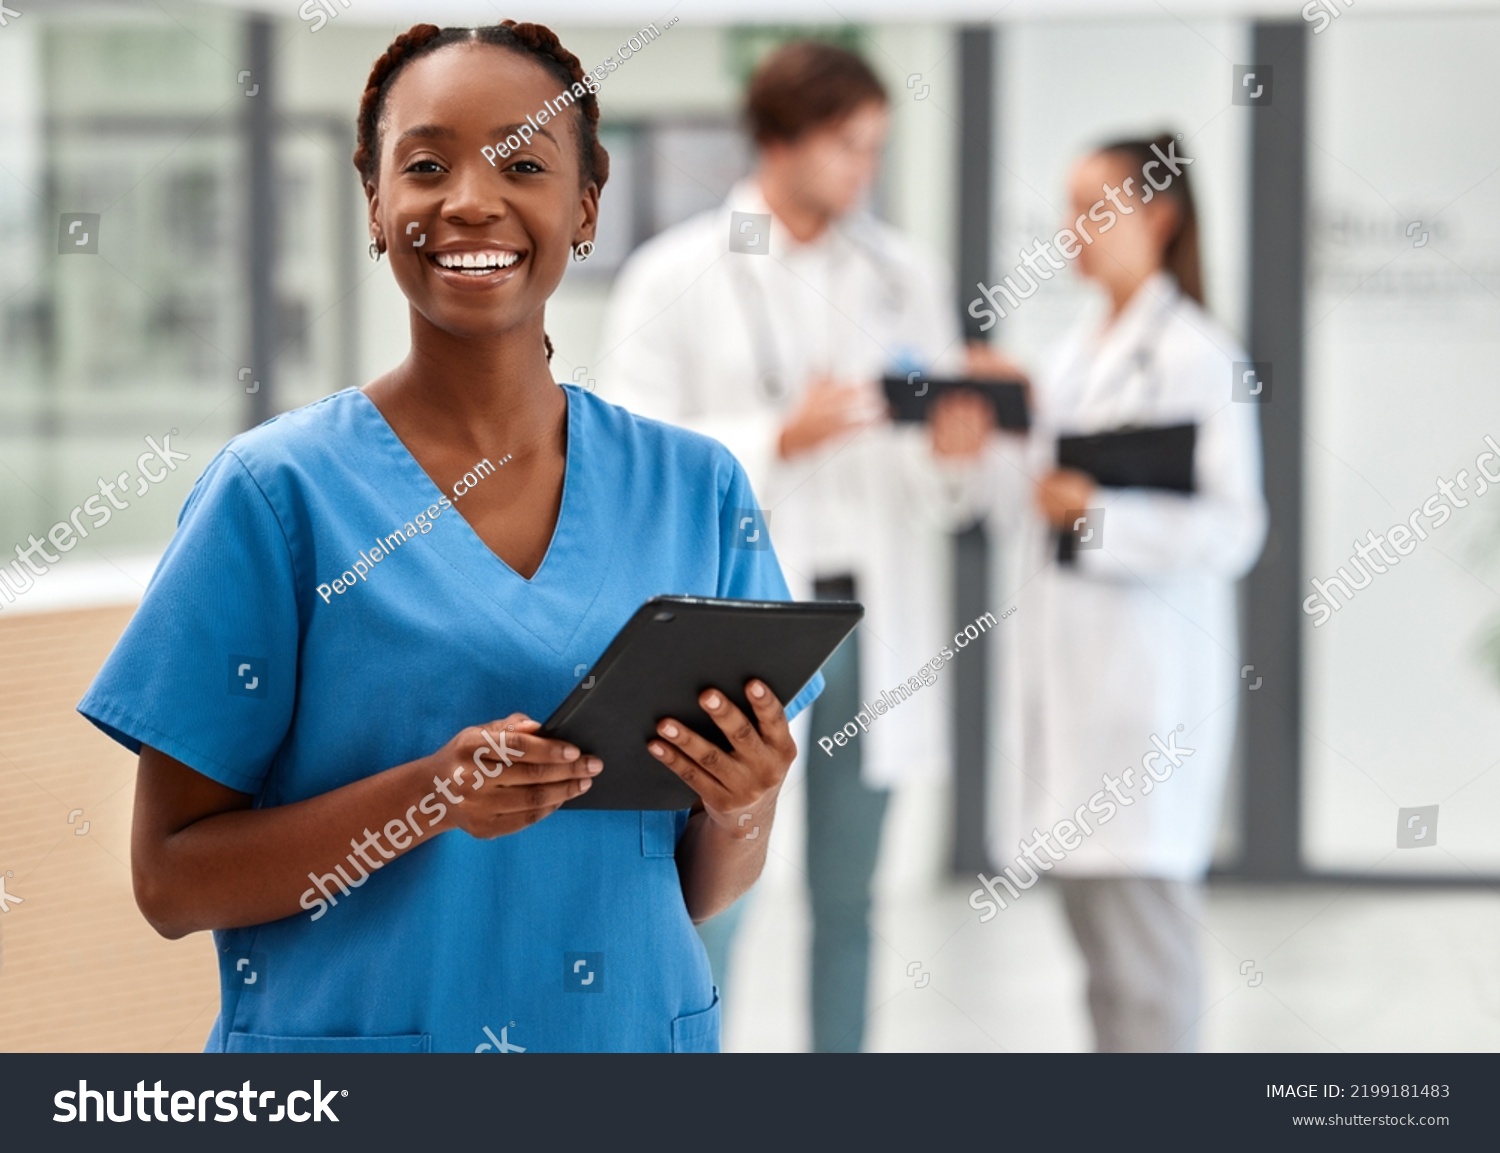 Portrait of happy woman doctor working on a digital tablet and smile while working at a hospital. Black female nurse doing medical and healthcare research on the internet or online at work at clinic #2199181483